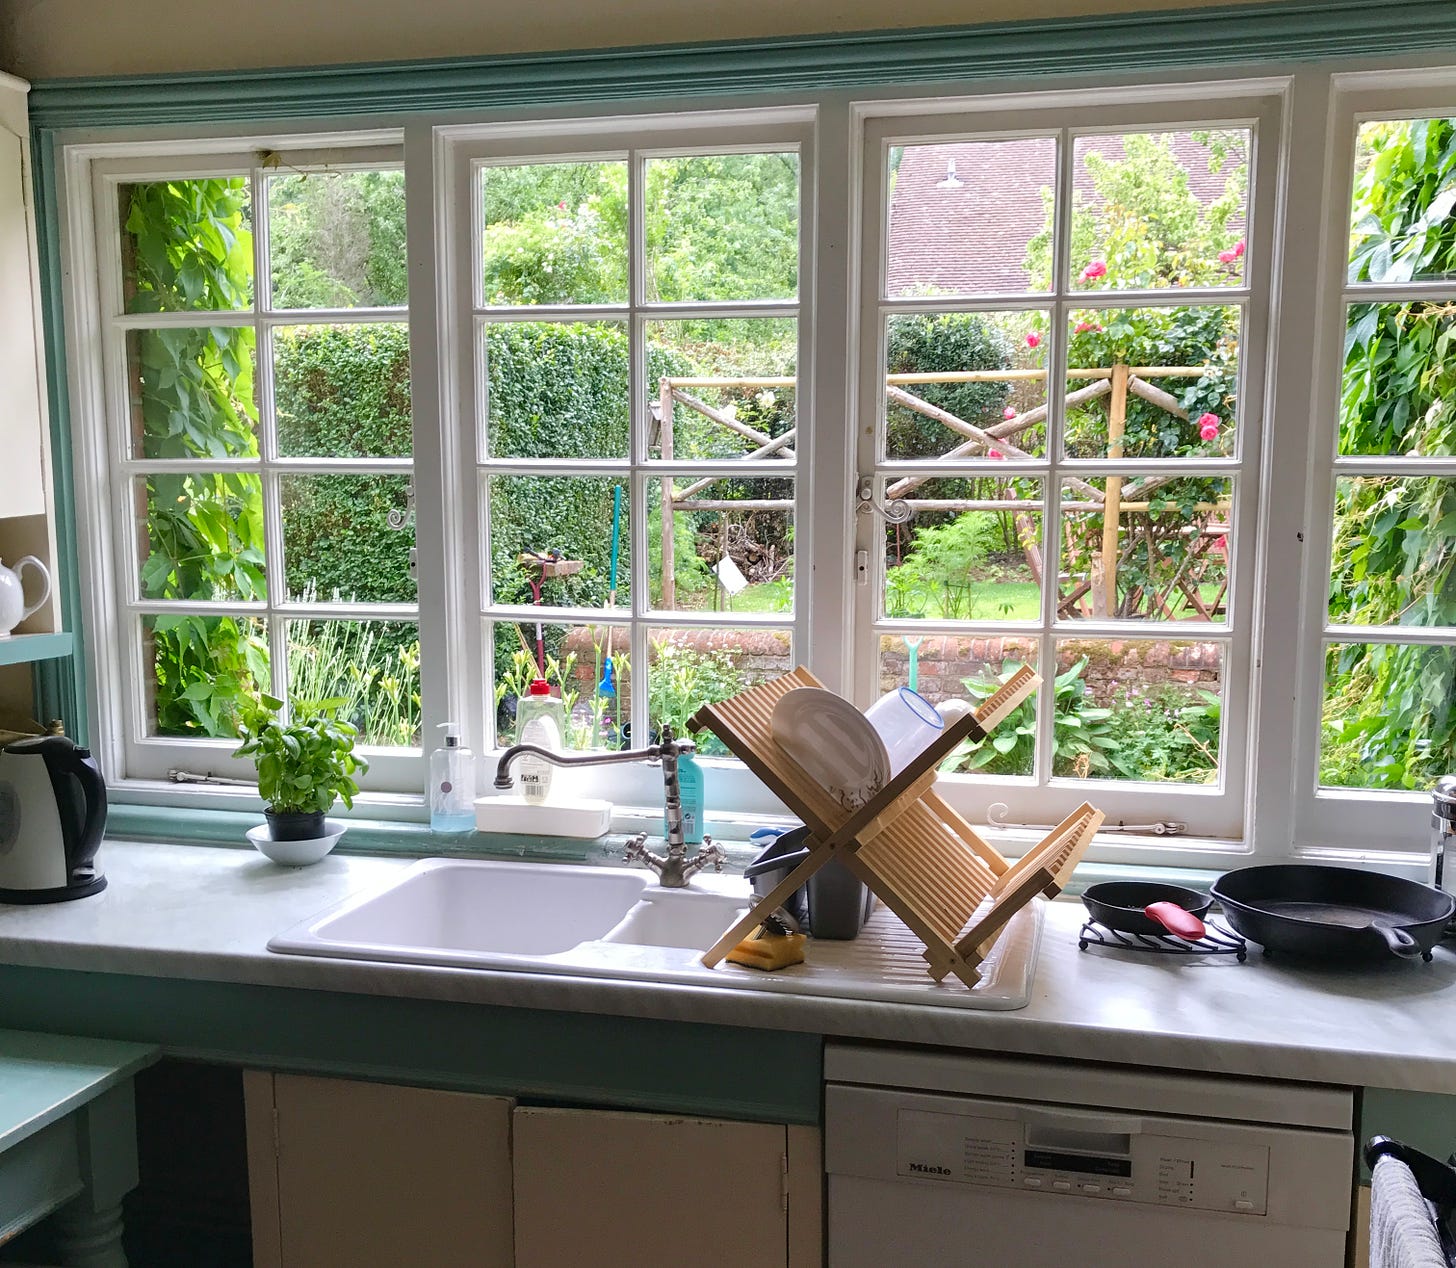 Kitchen view of the garden at the Kilns, home to CS Lewis. 